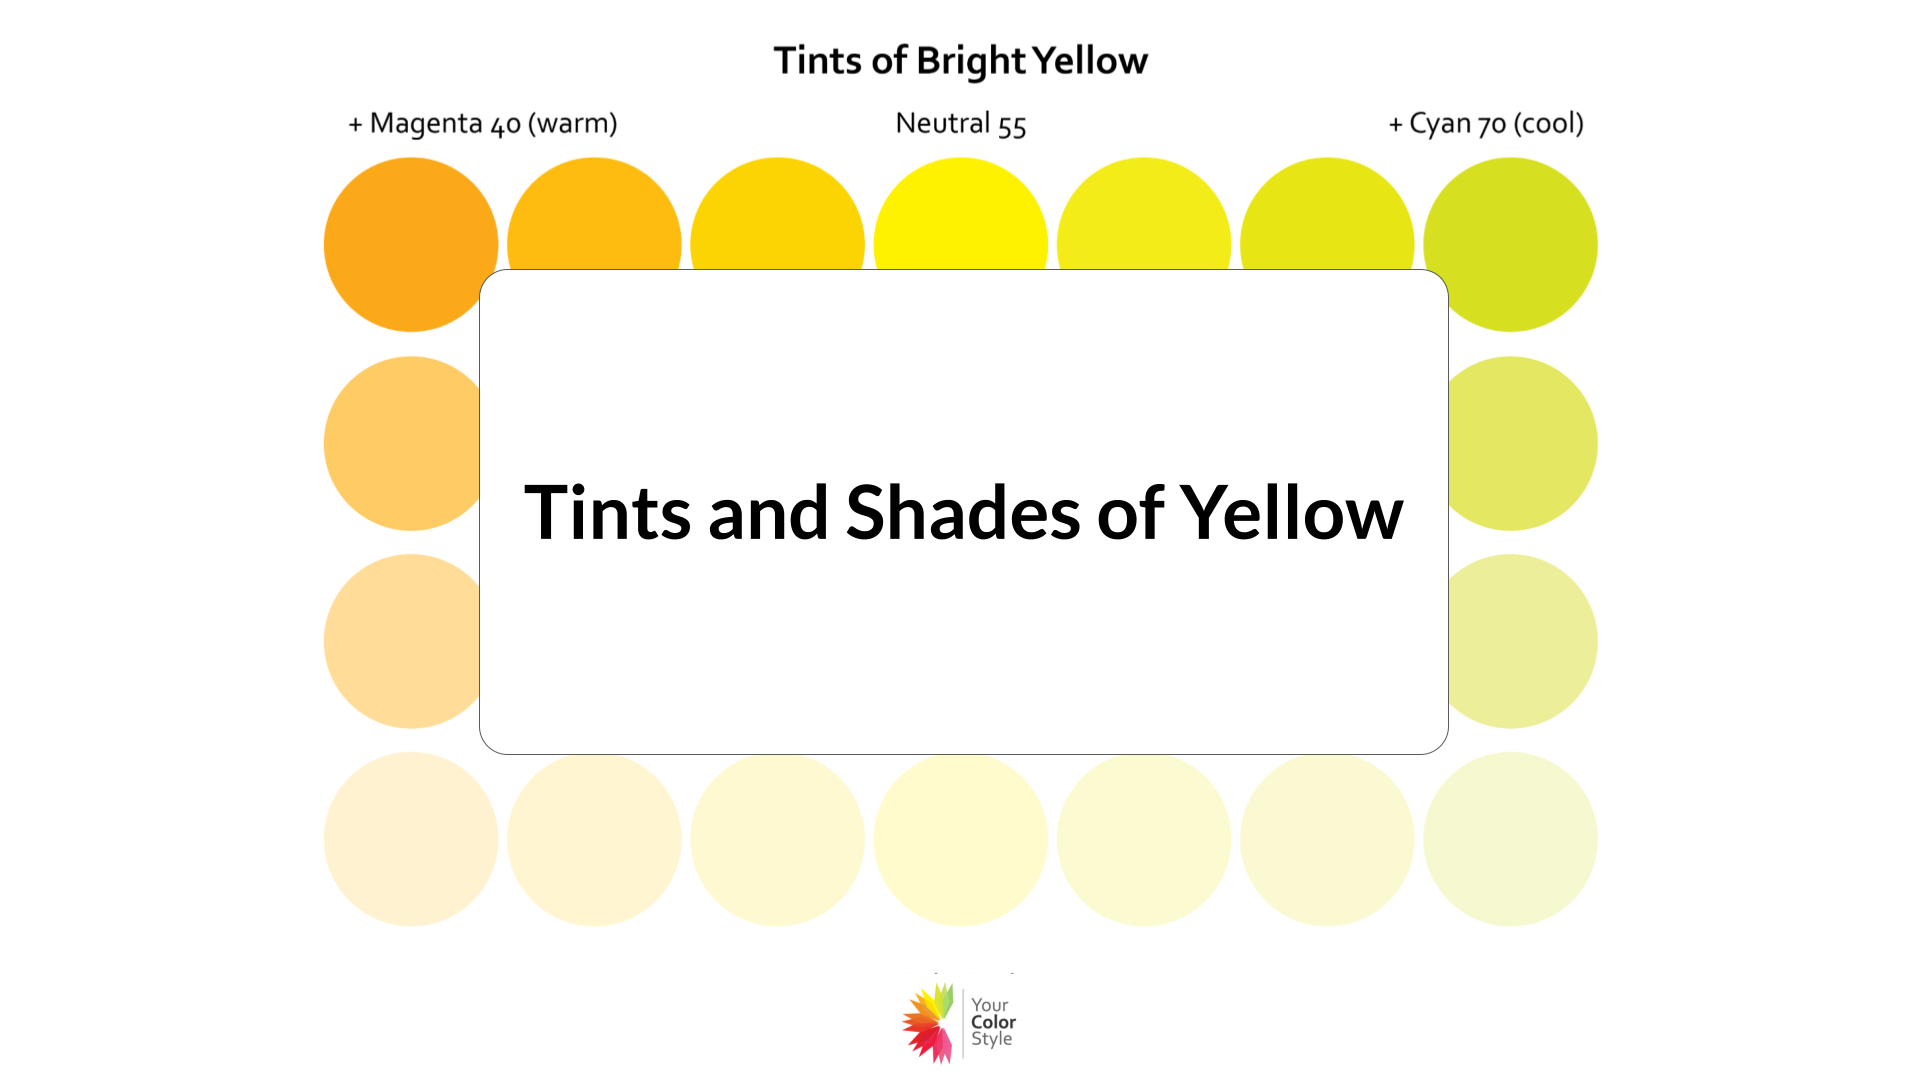 Tints and Shades of Yellow